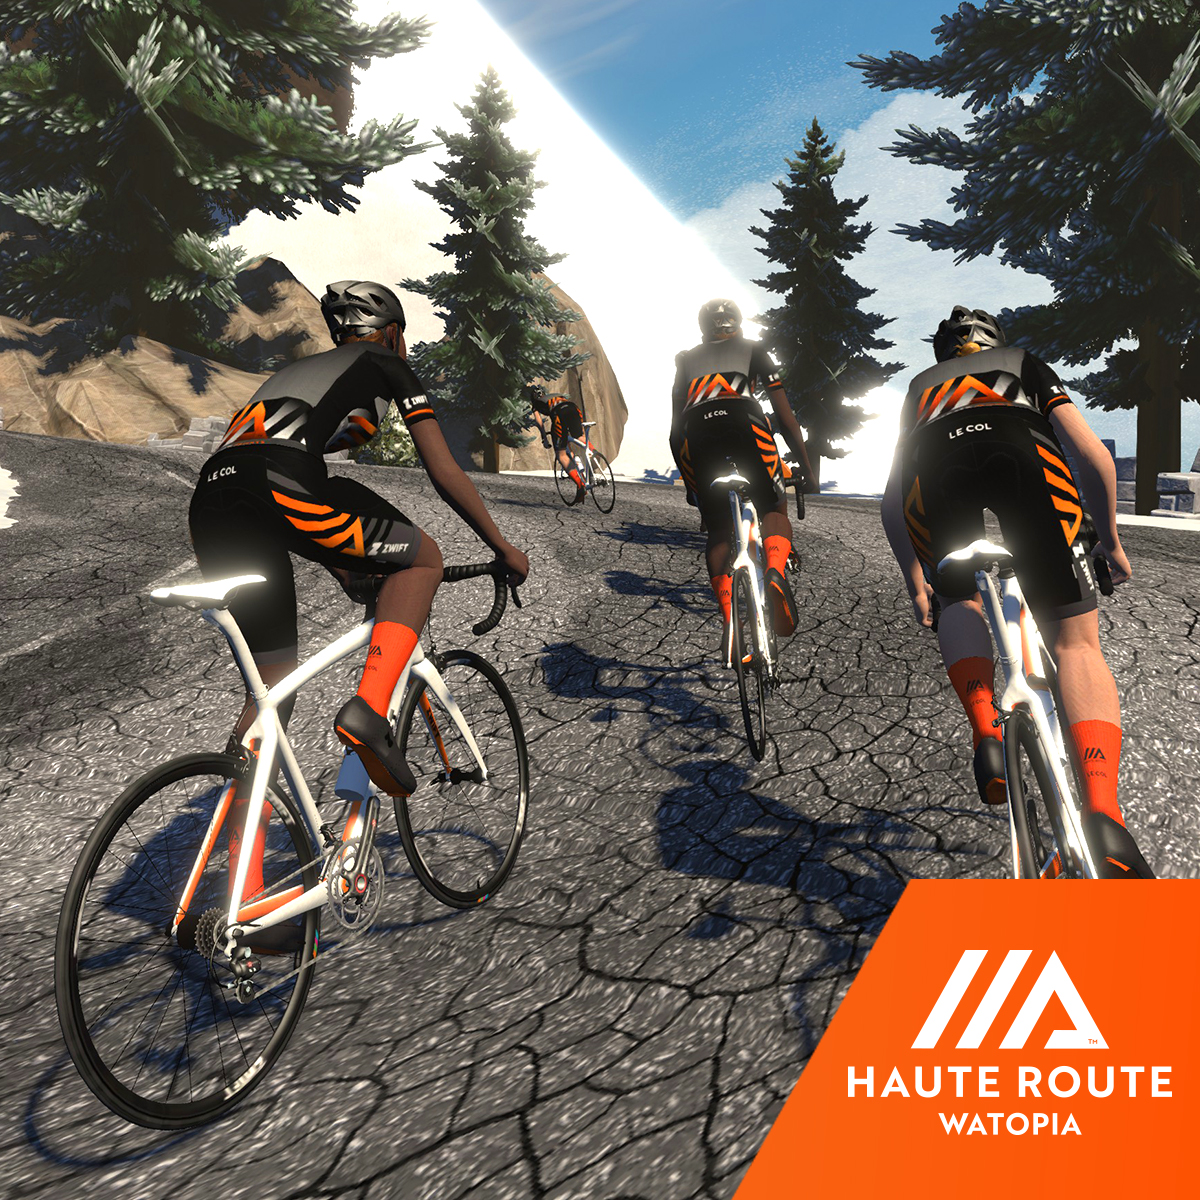 Zwift on Twitter: "@DrDarrenRhodes there! Our servers seem to have been (you can check automatic at https://t.co/lXRKdYoz9F) but we appreciate that some users' devices have struggled with the